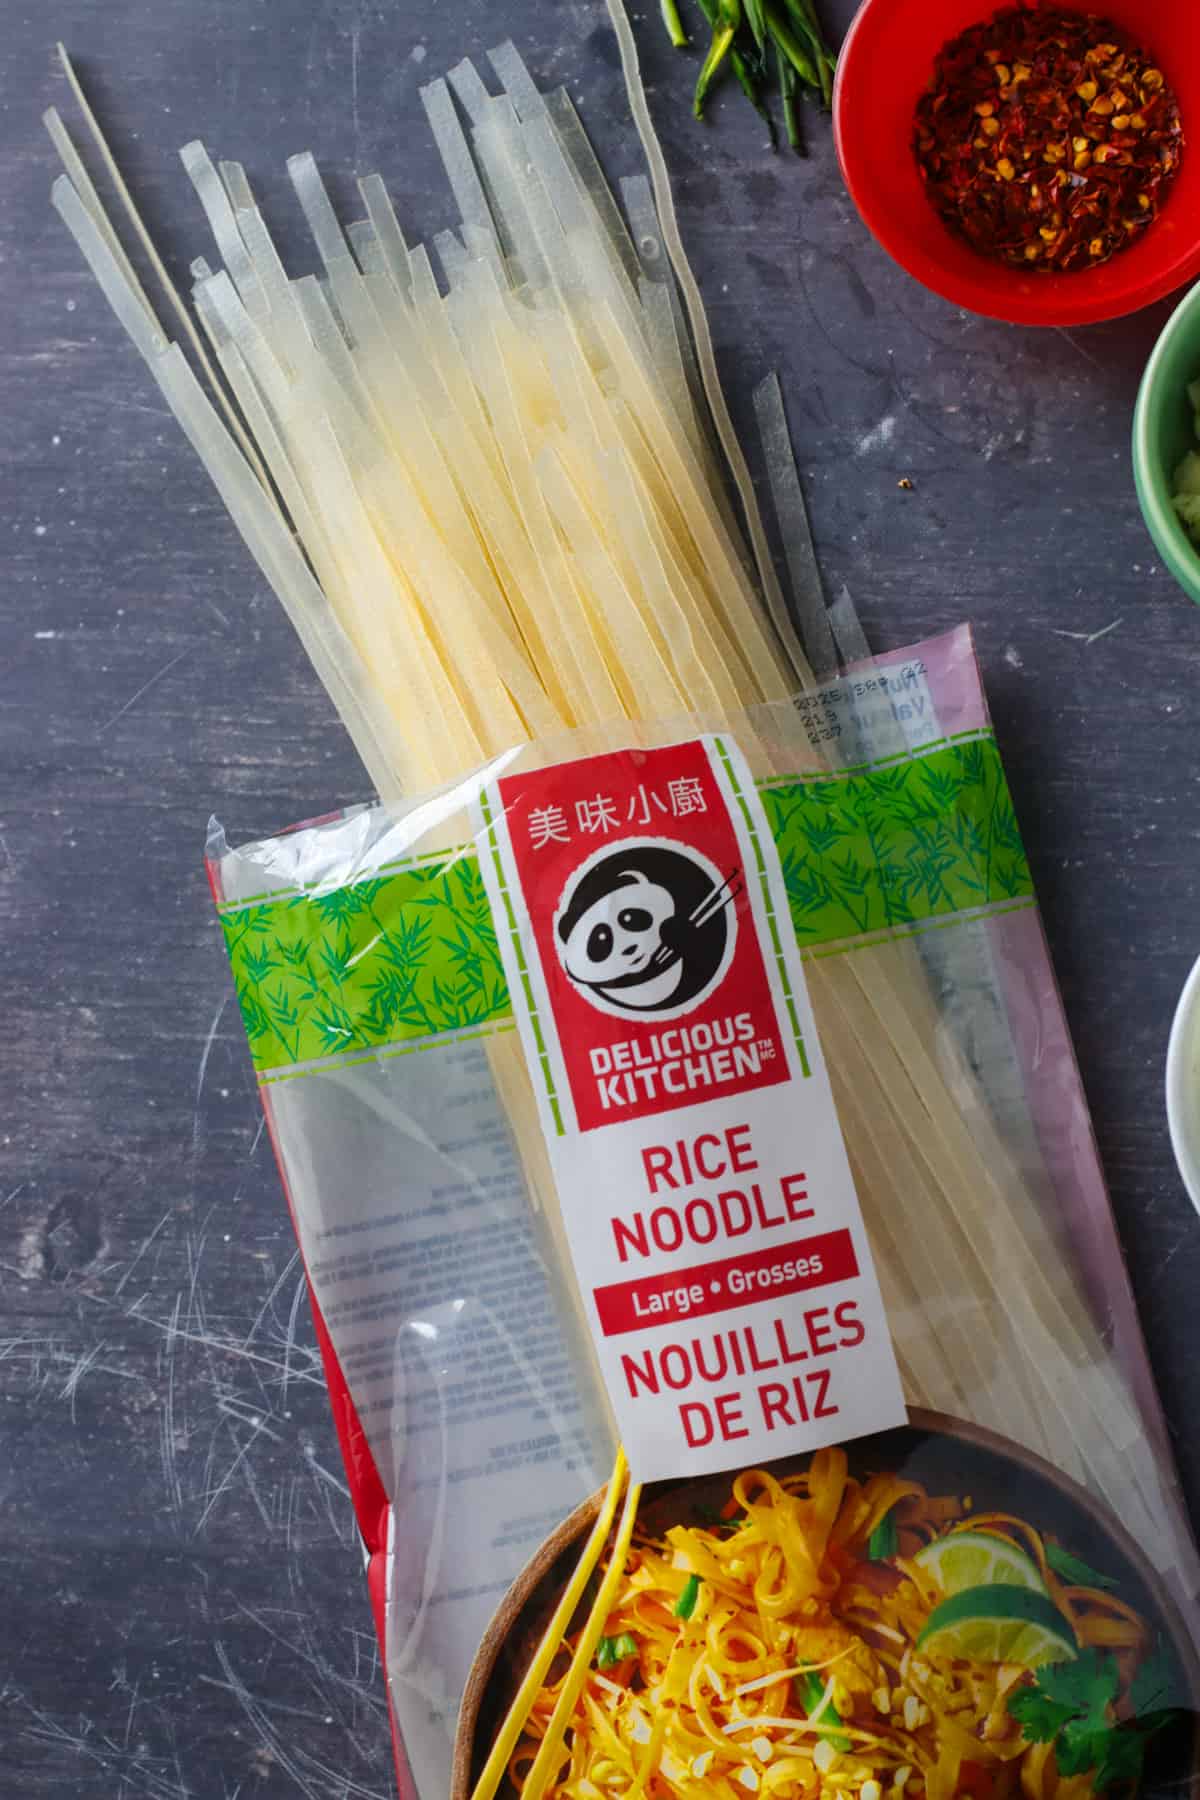 The rice noodles in its package.